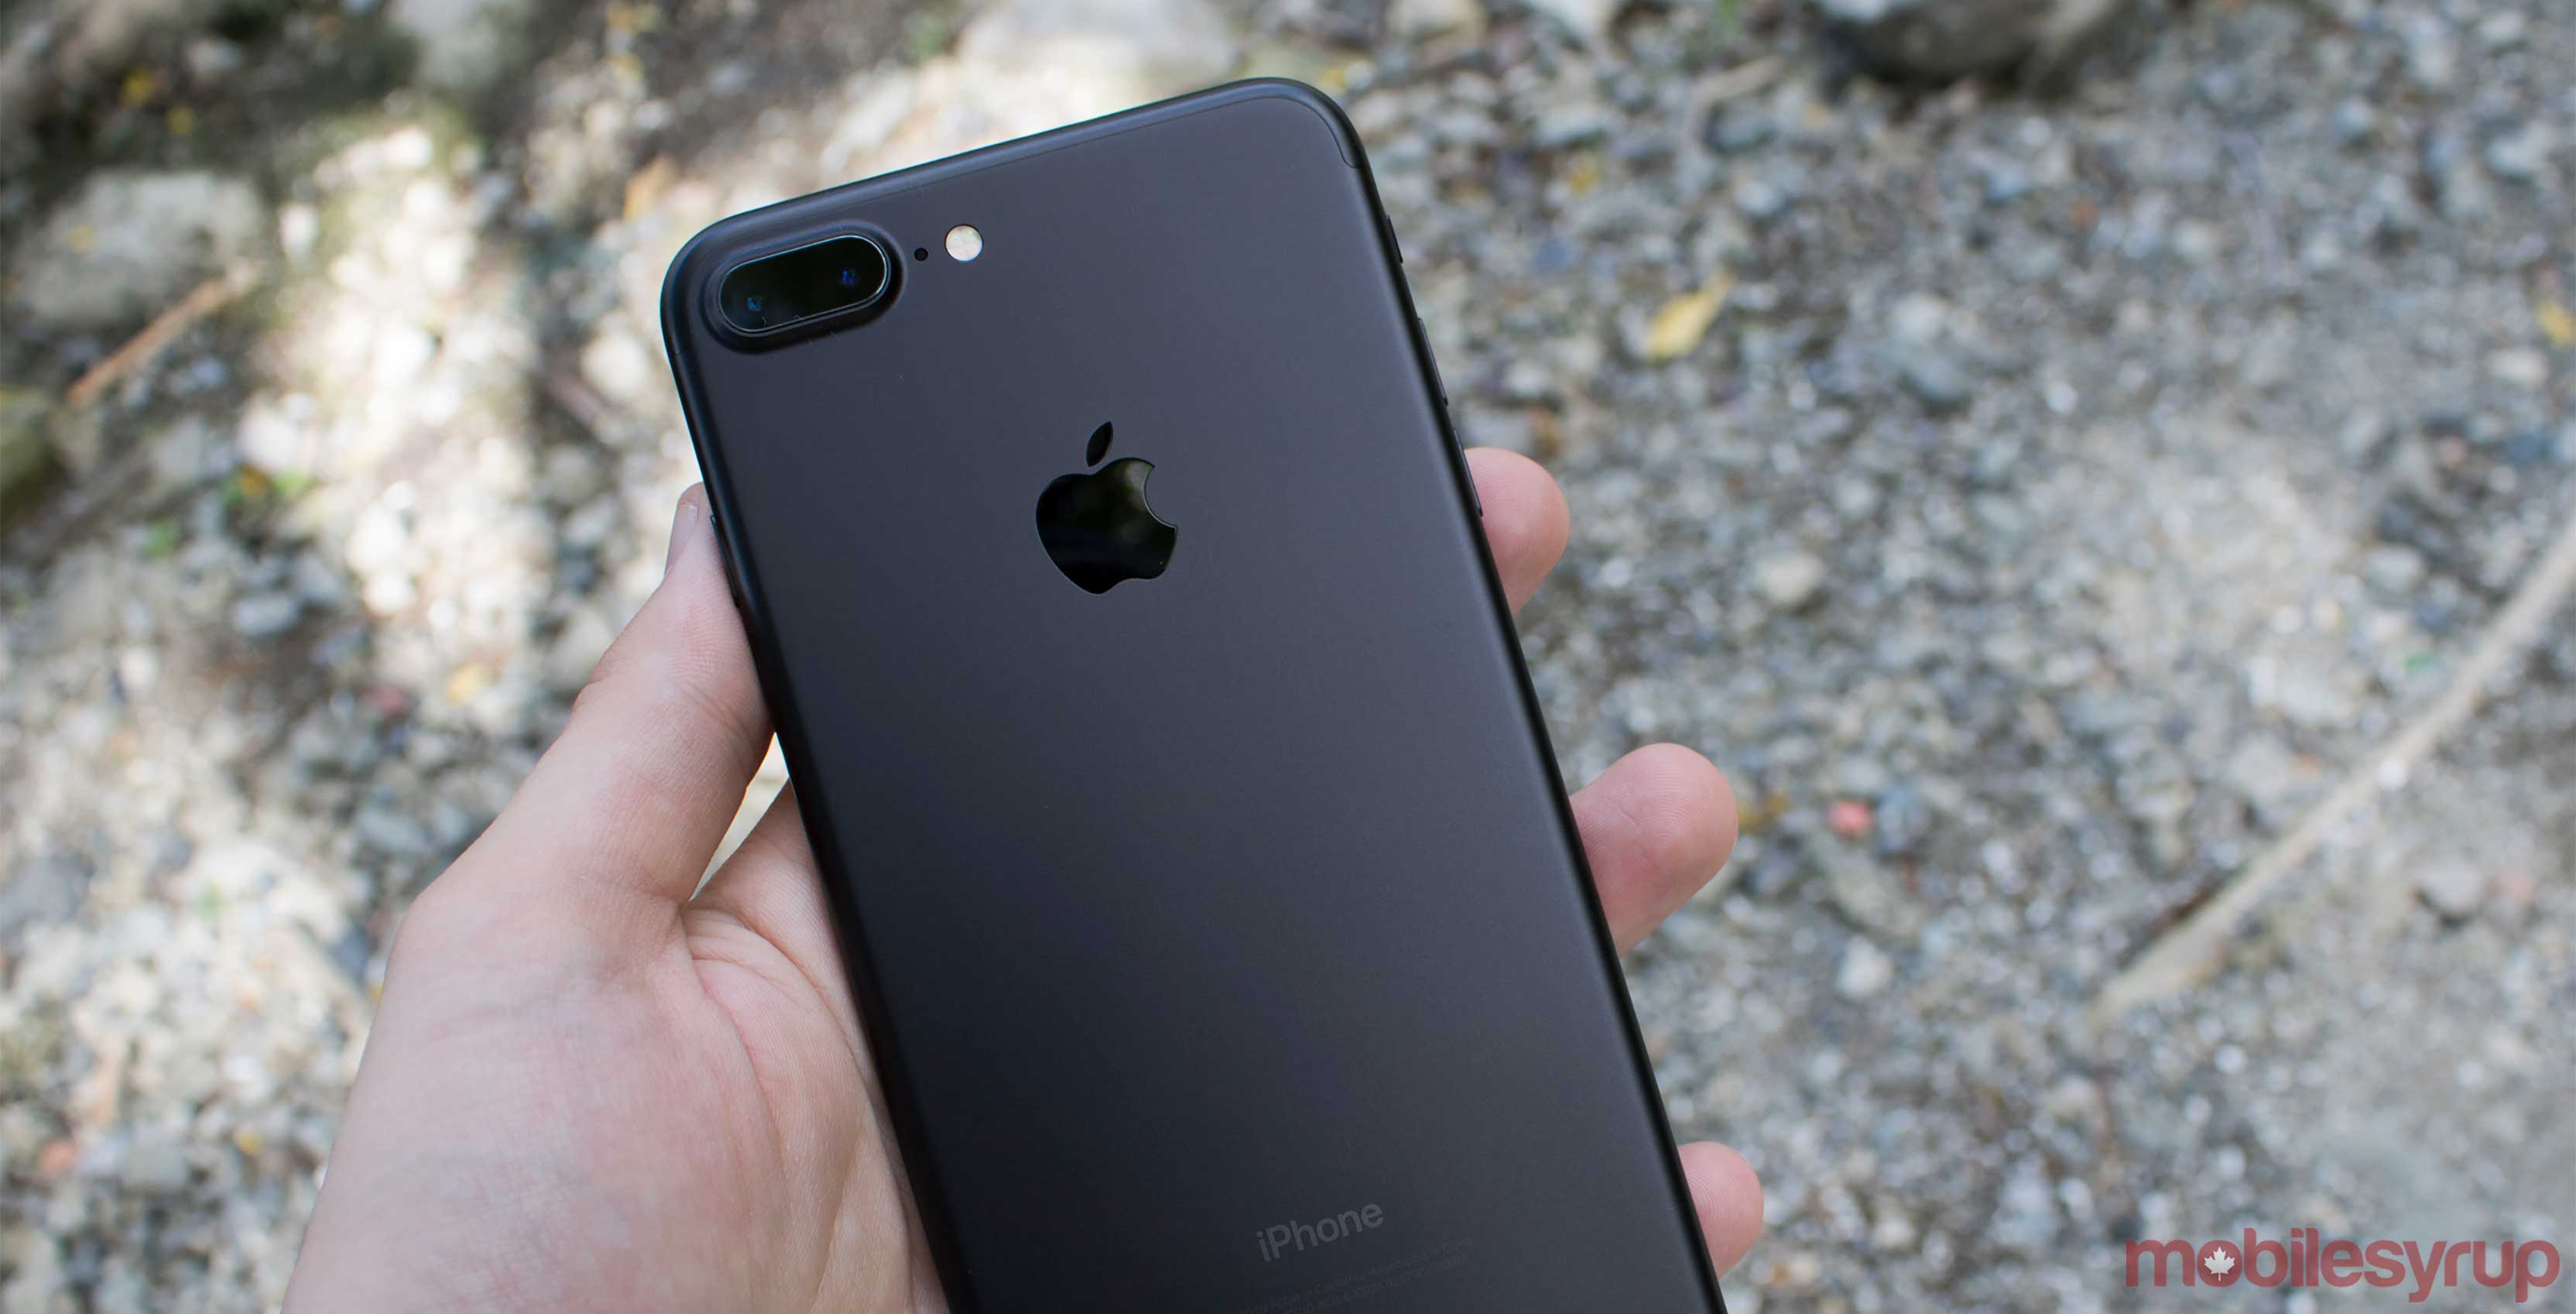 Apple iPhone 7 being held in a hand - Next could have OLED screen